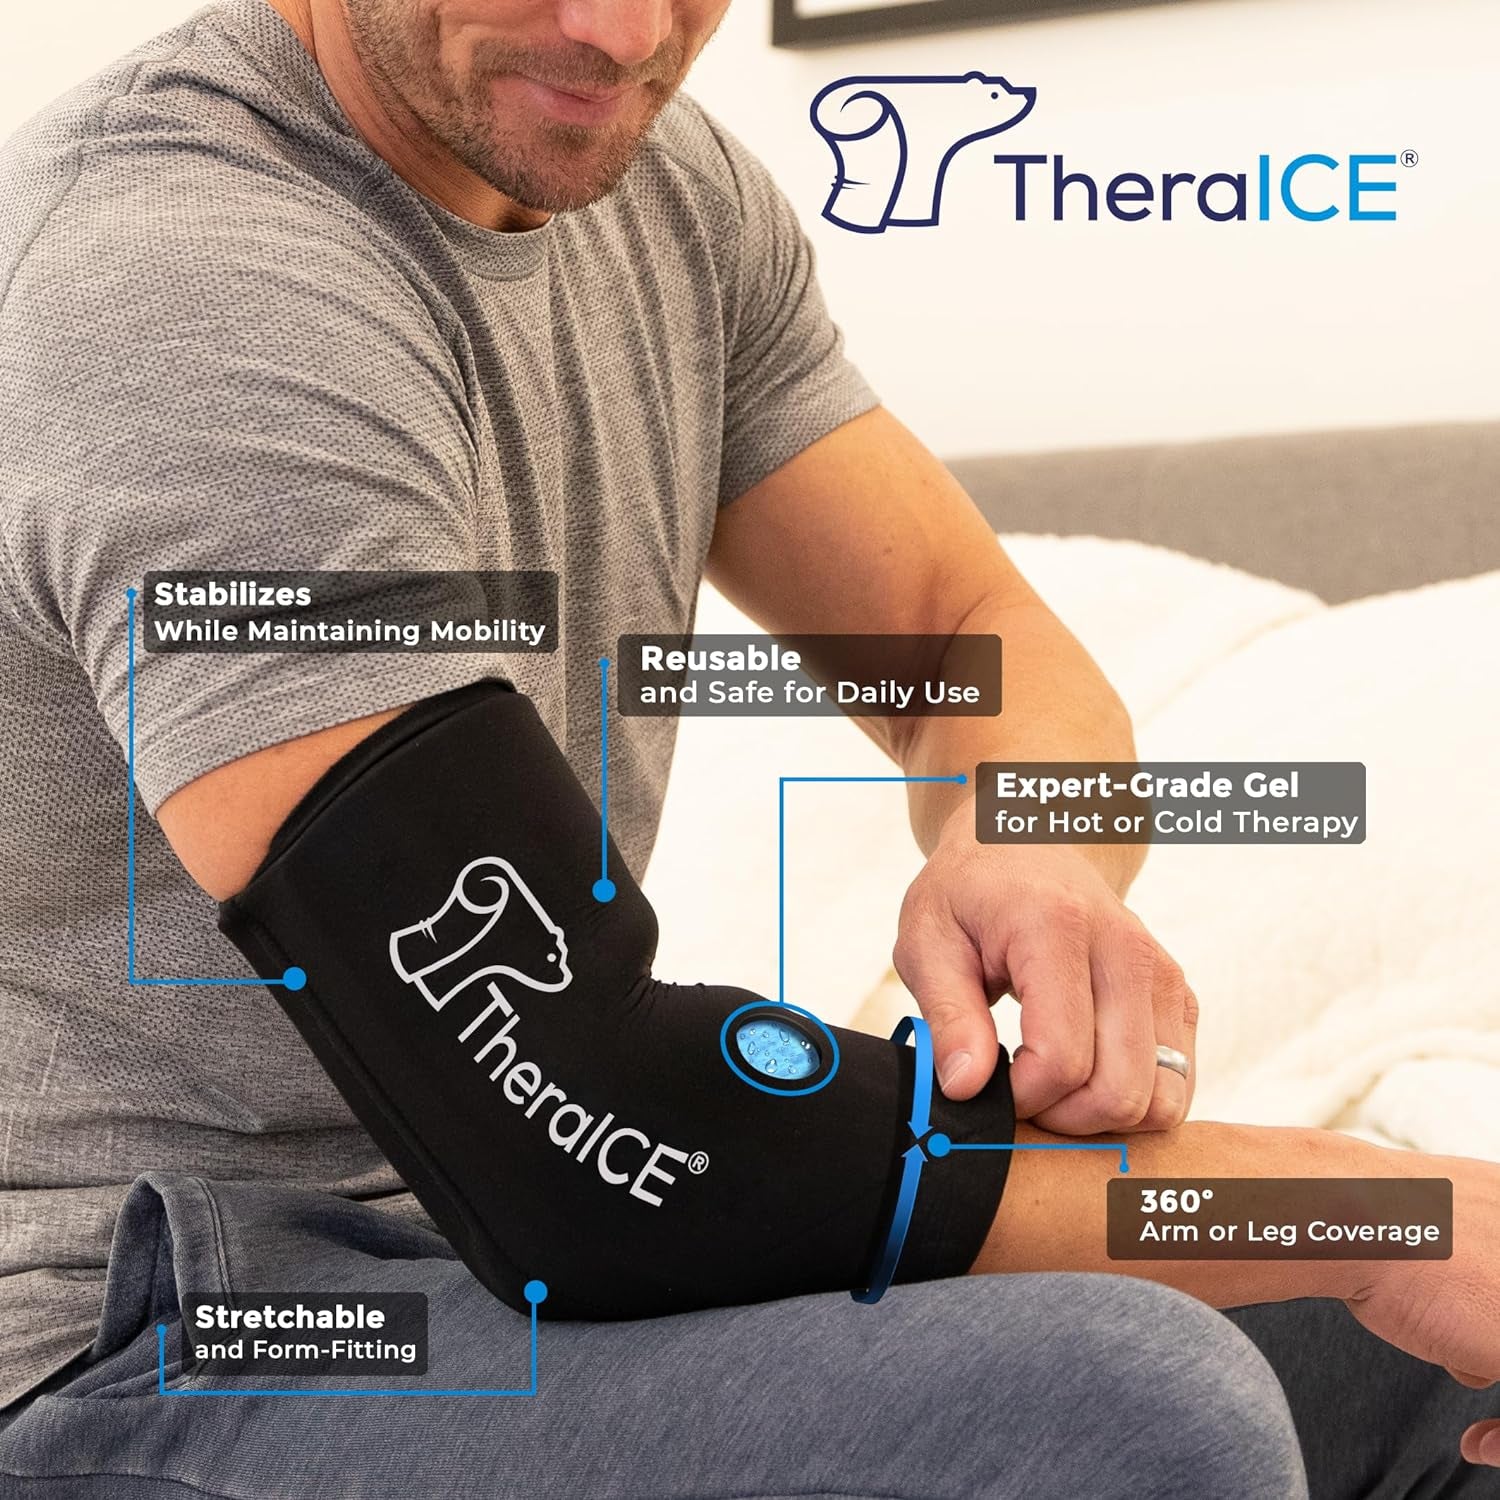 Theraice Elbow & Knee Ice Pack for Injuries Compression Sleeve, Reusable Gel Cold Pack for Knee, Elbow, Ankle, Calf - Flexible Cold Wrap Recovery for Meniscus, ACL, MCL, Pain Relief (M) Black